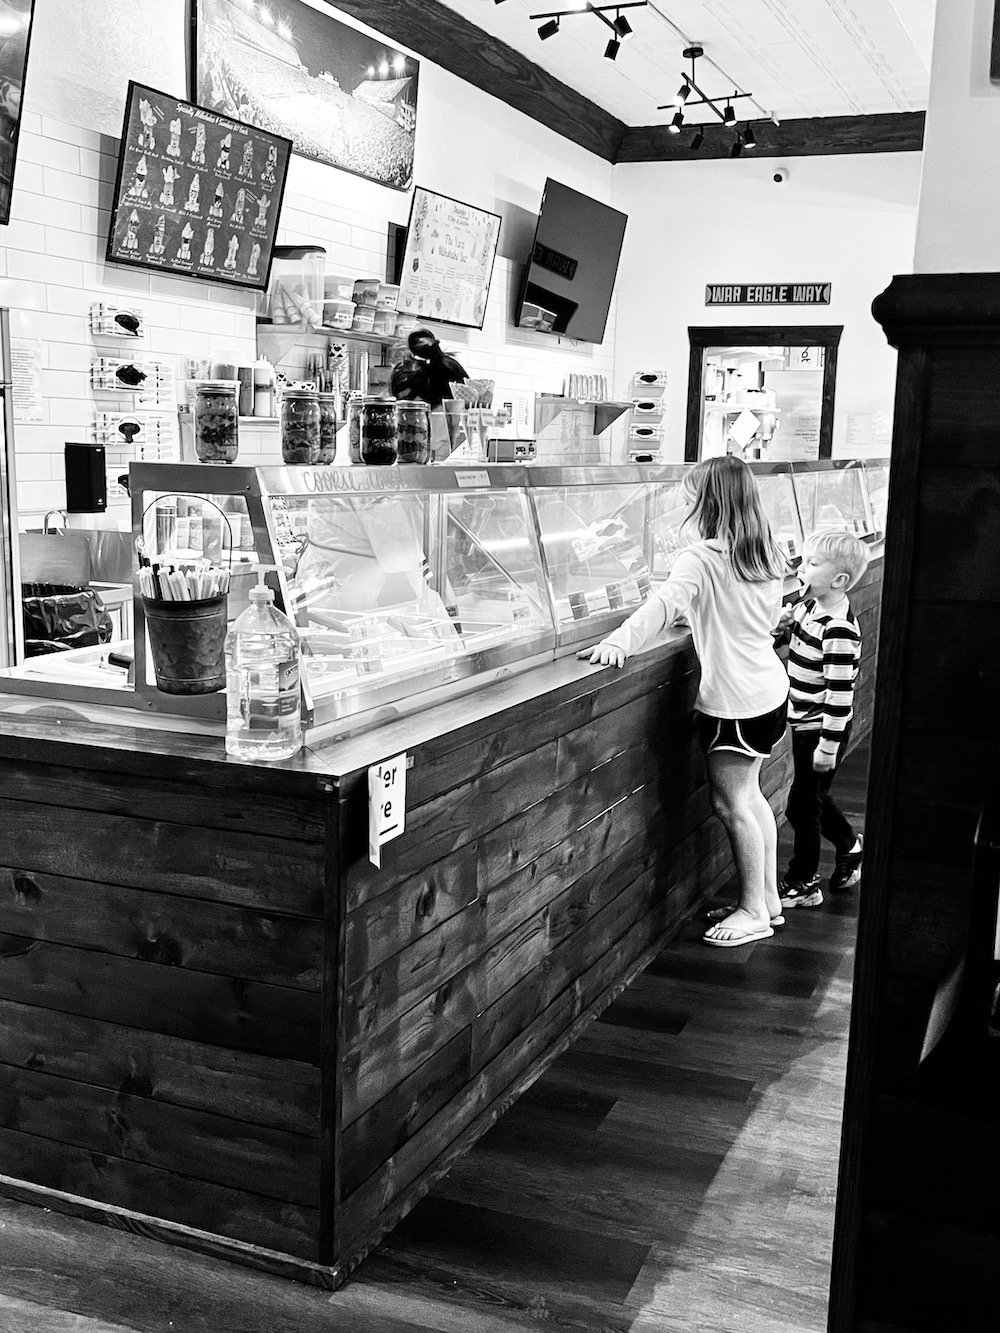 Image of a child ordering ice cream